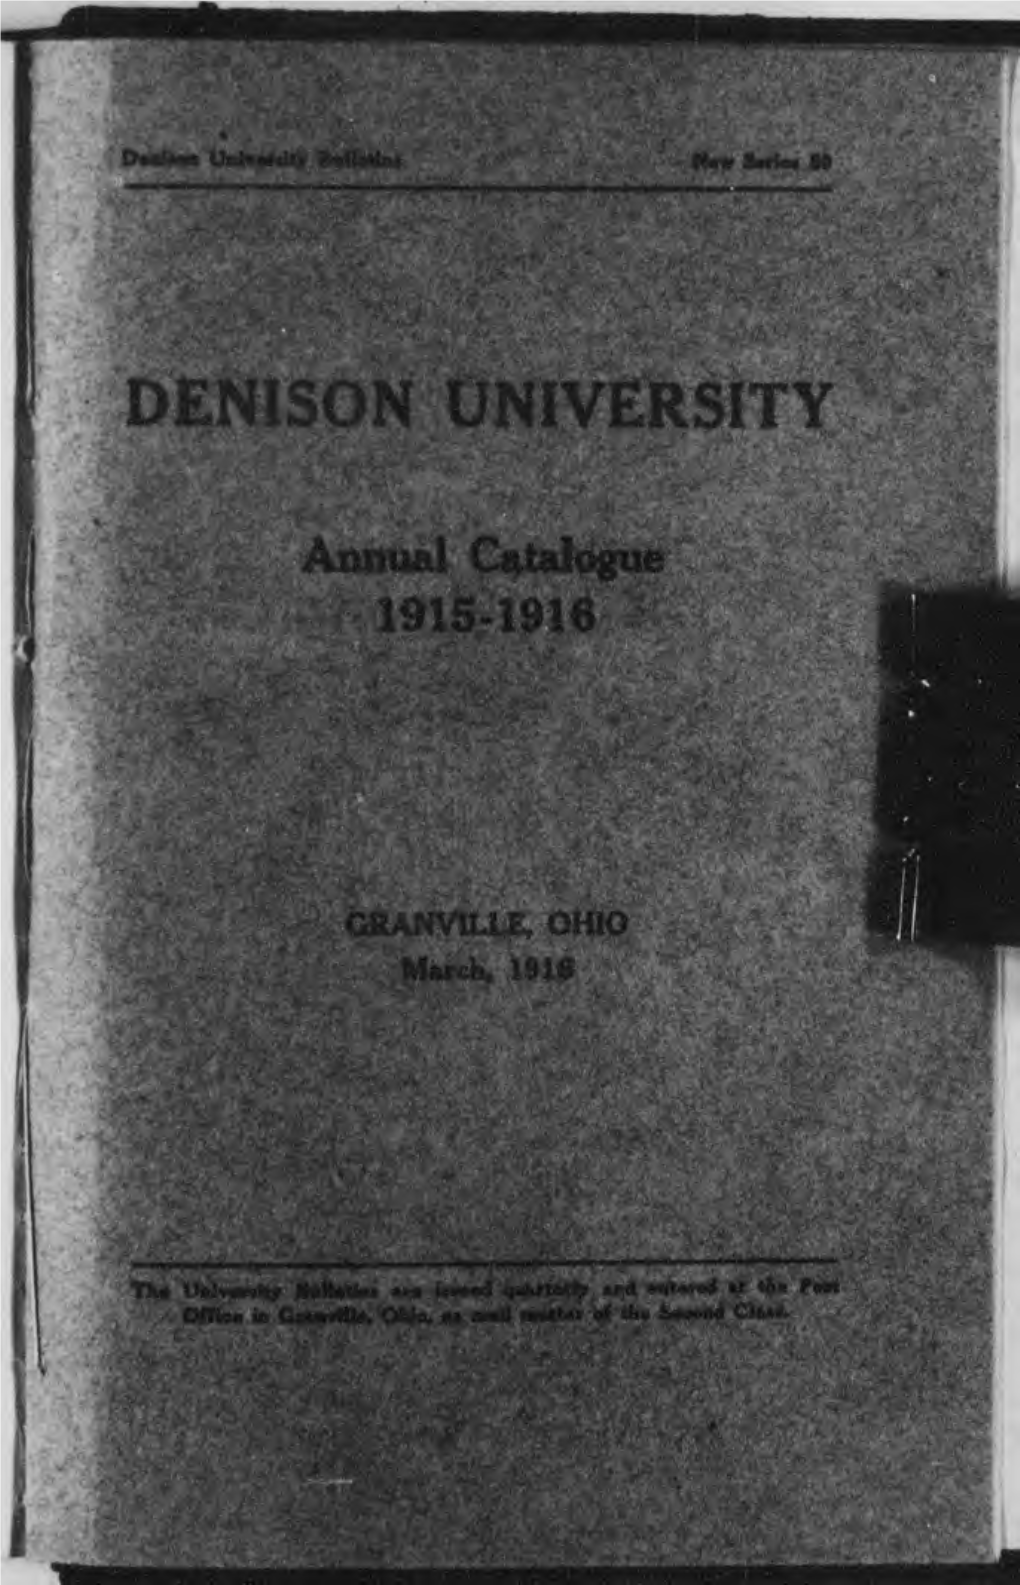 The Eighty-Fifth Annual Catalogue of Denison University for the Year